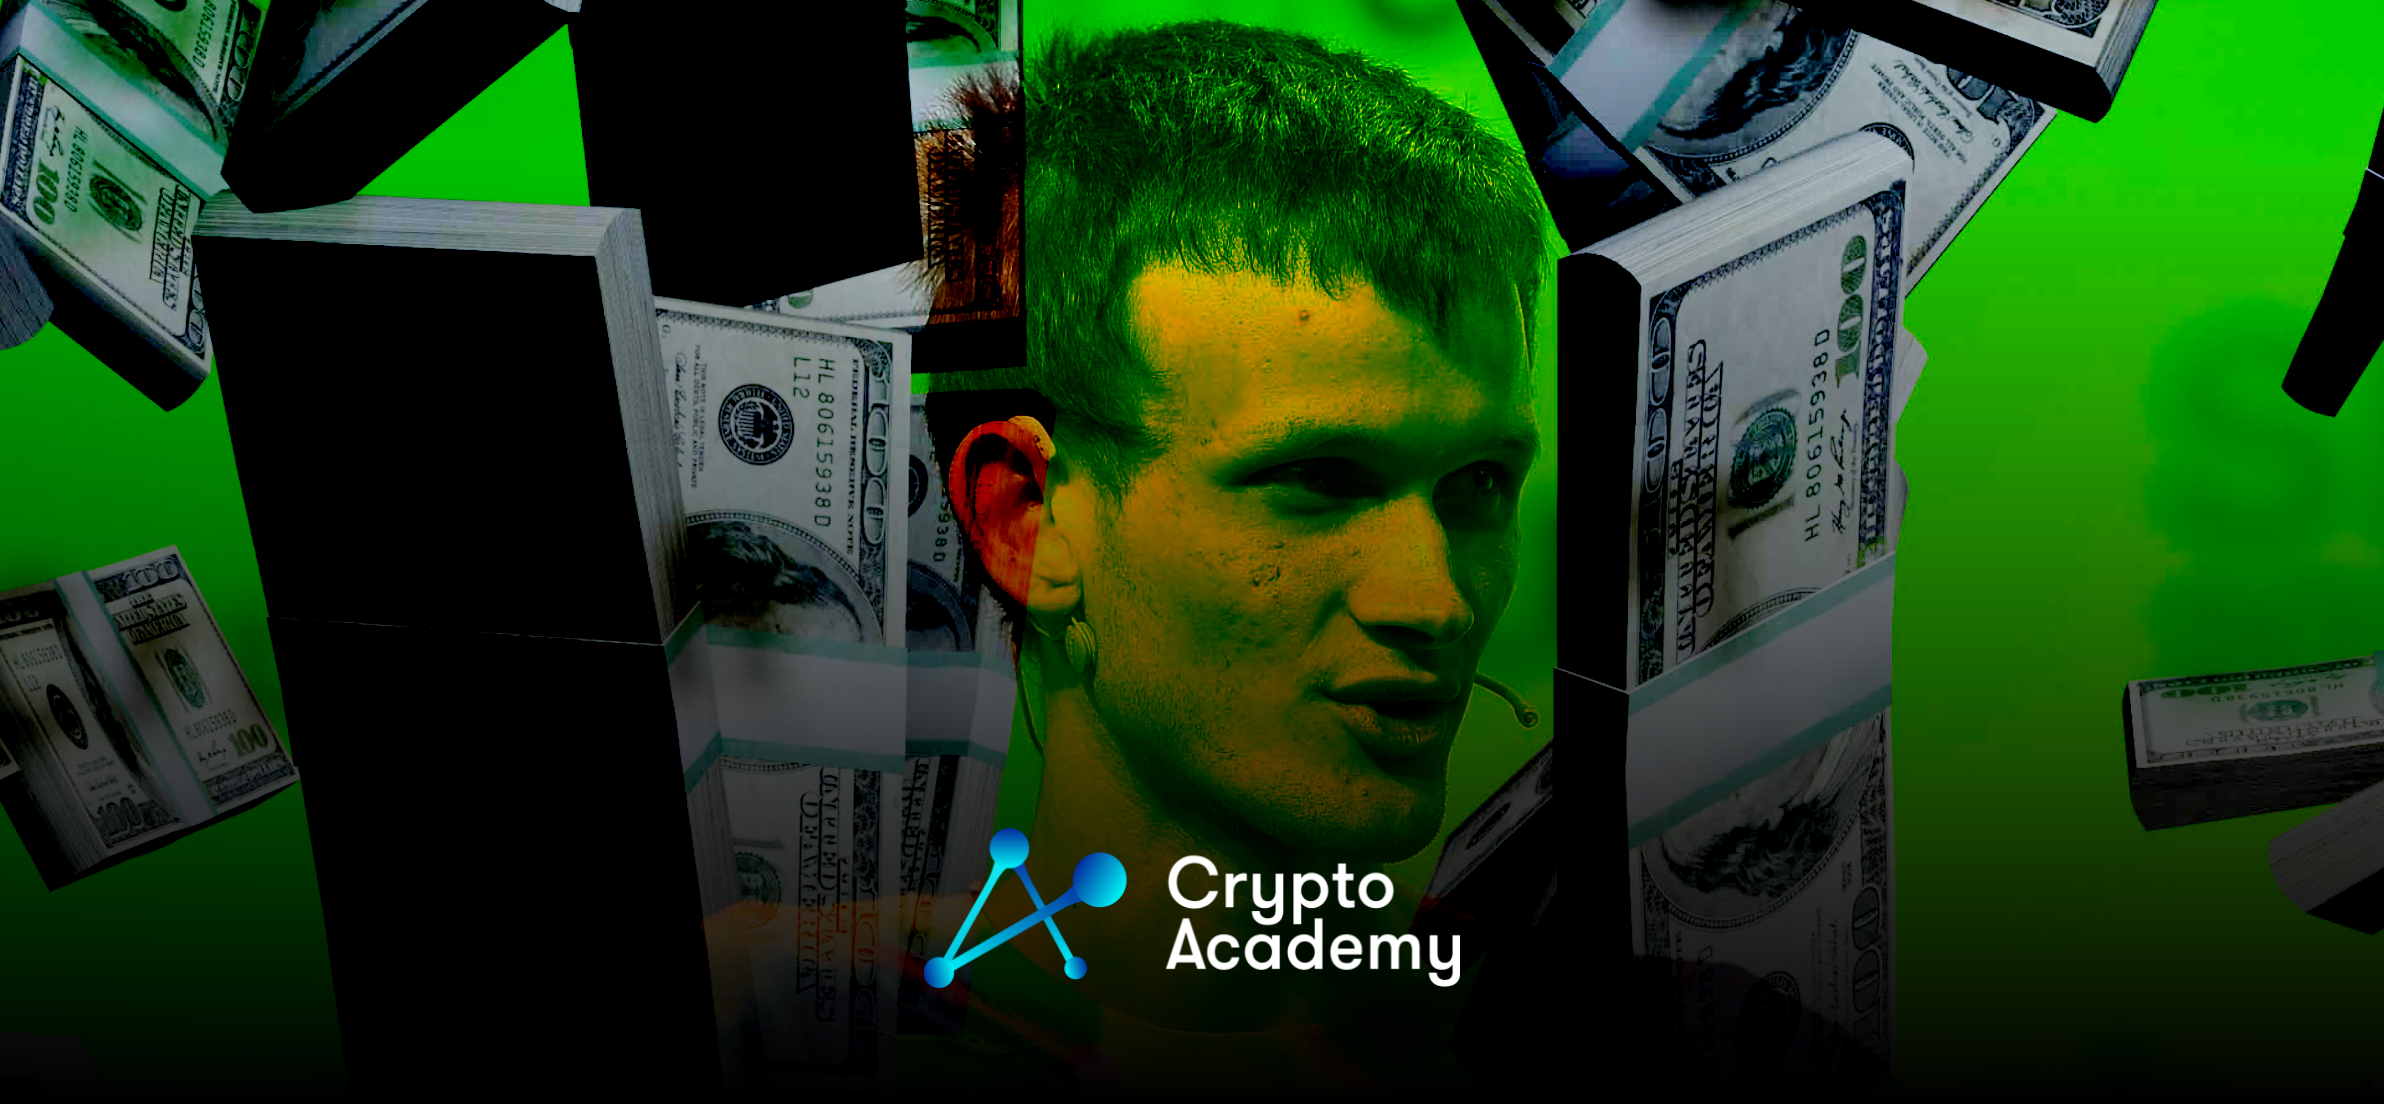 Vitalik Buterin moves 400 ETH to Coinbase, sparking sales speculation amid bearish short-term forecasts but long-term optimism for Ethereum.